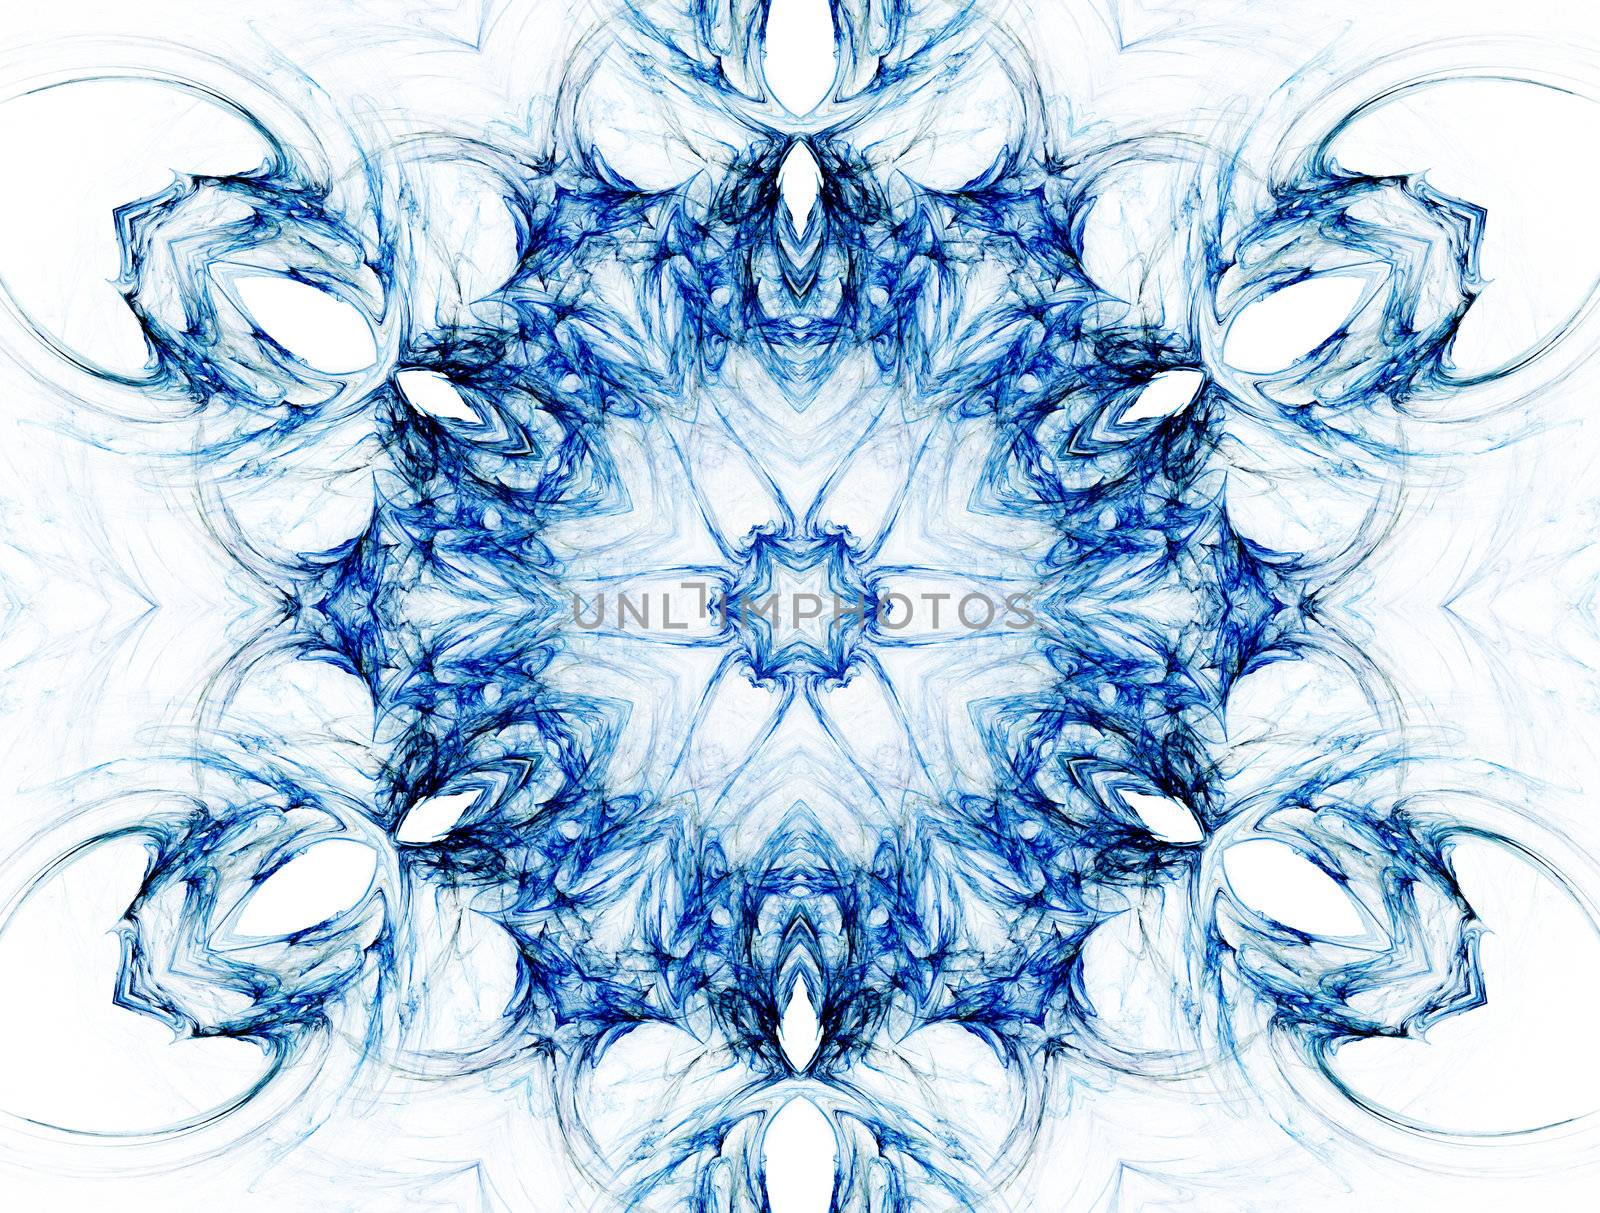 Kaleidoscopic image that resembles a mandala, chakra or abstract flower.